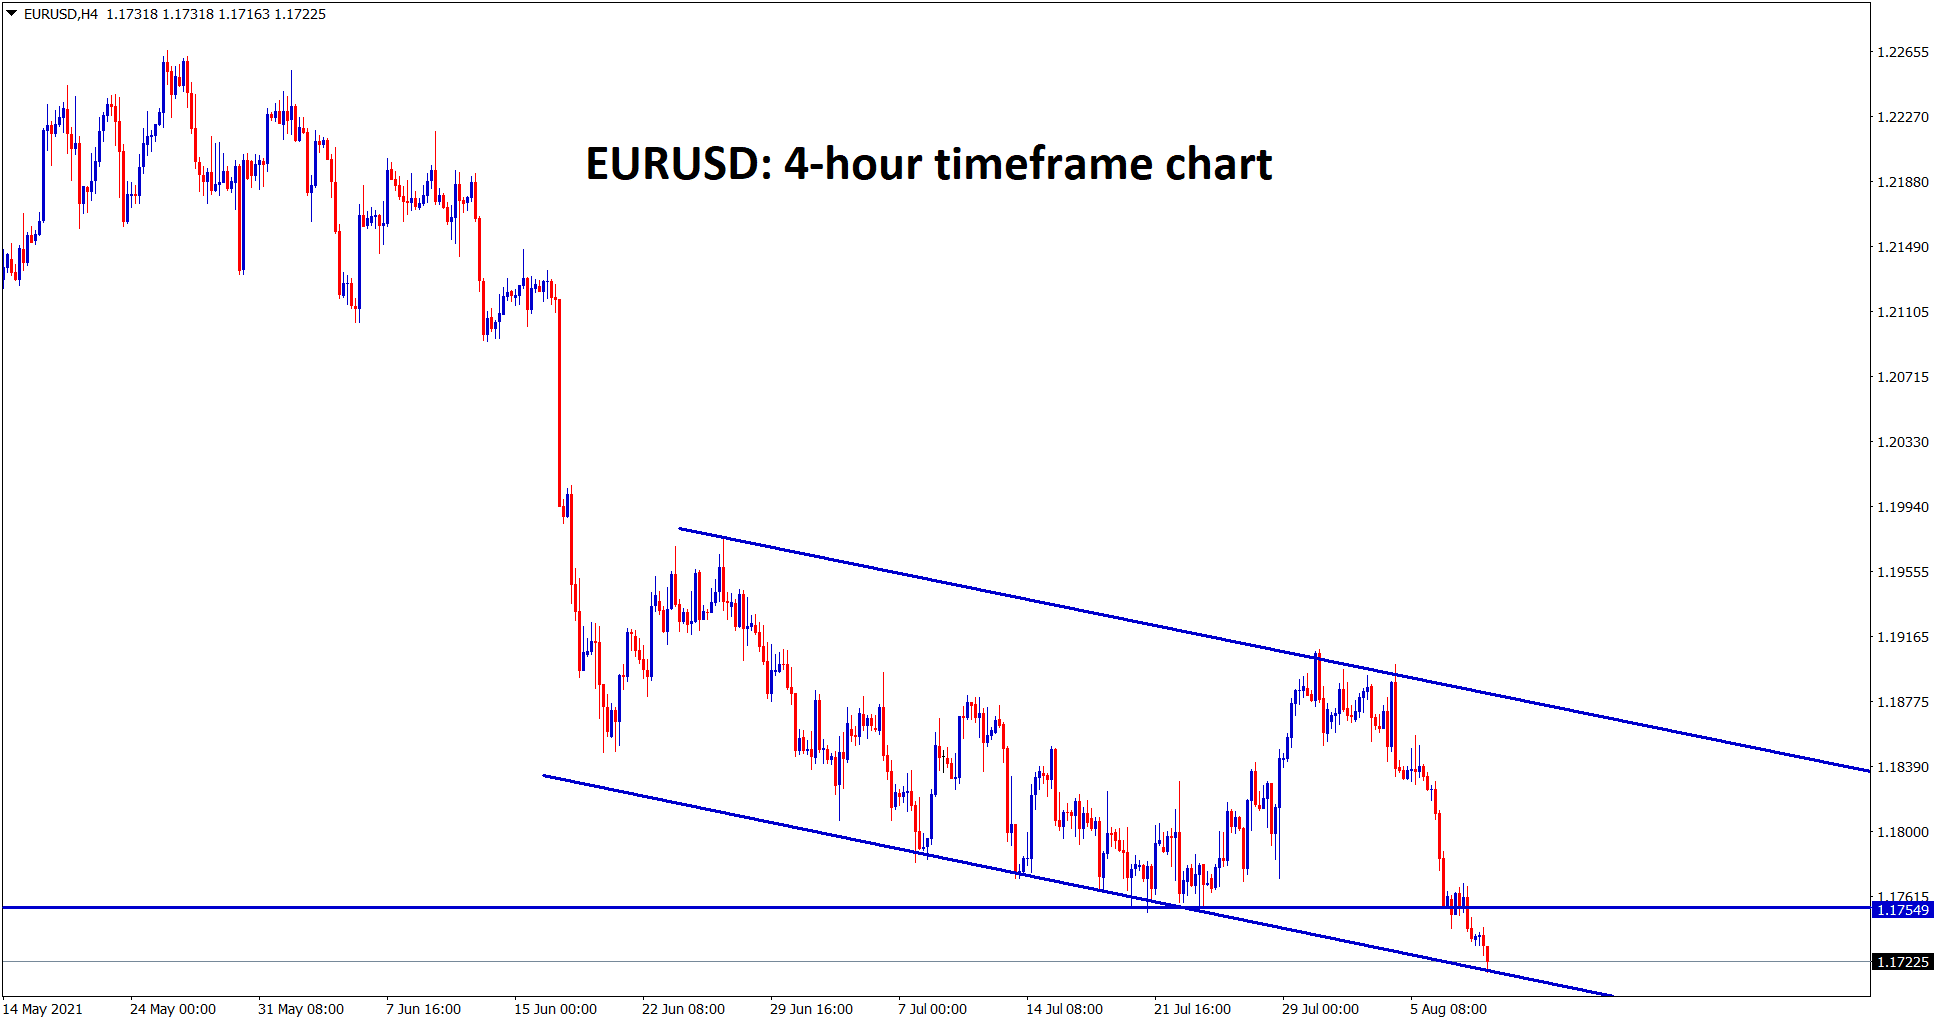 EURUSD has broken the bottom of the descending triangle and also hits the lower low